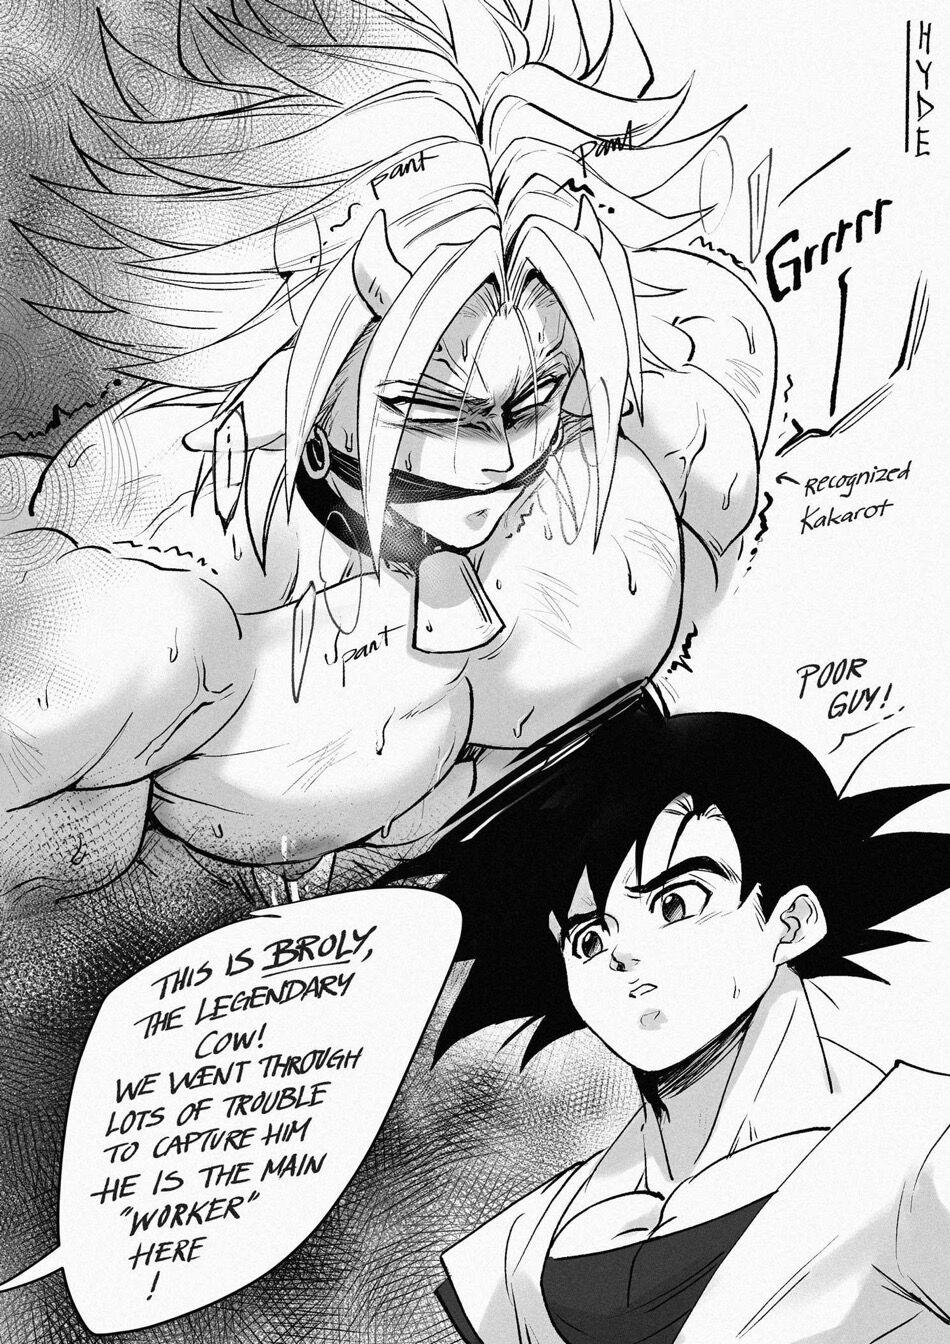 Cow broly 15